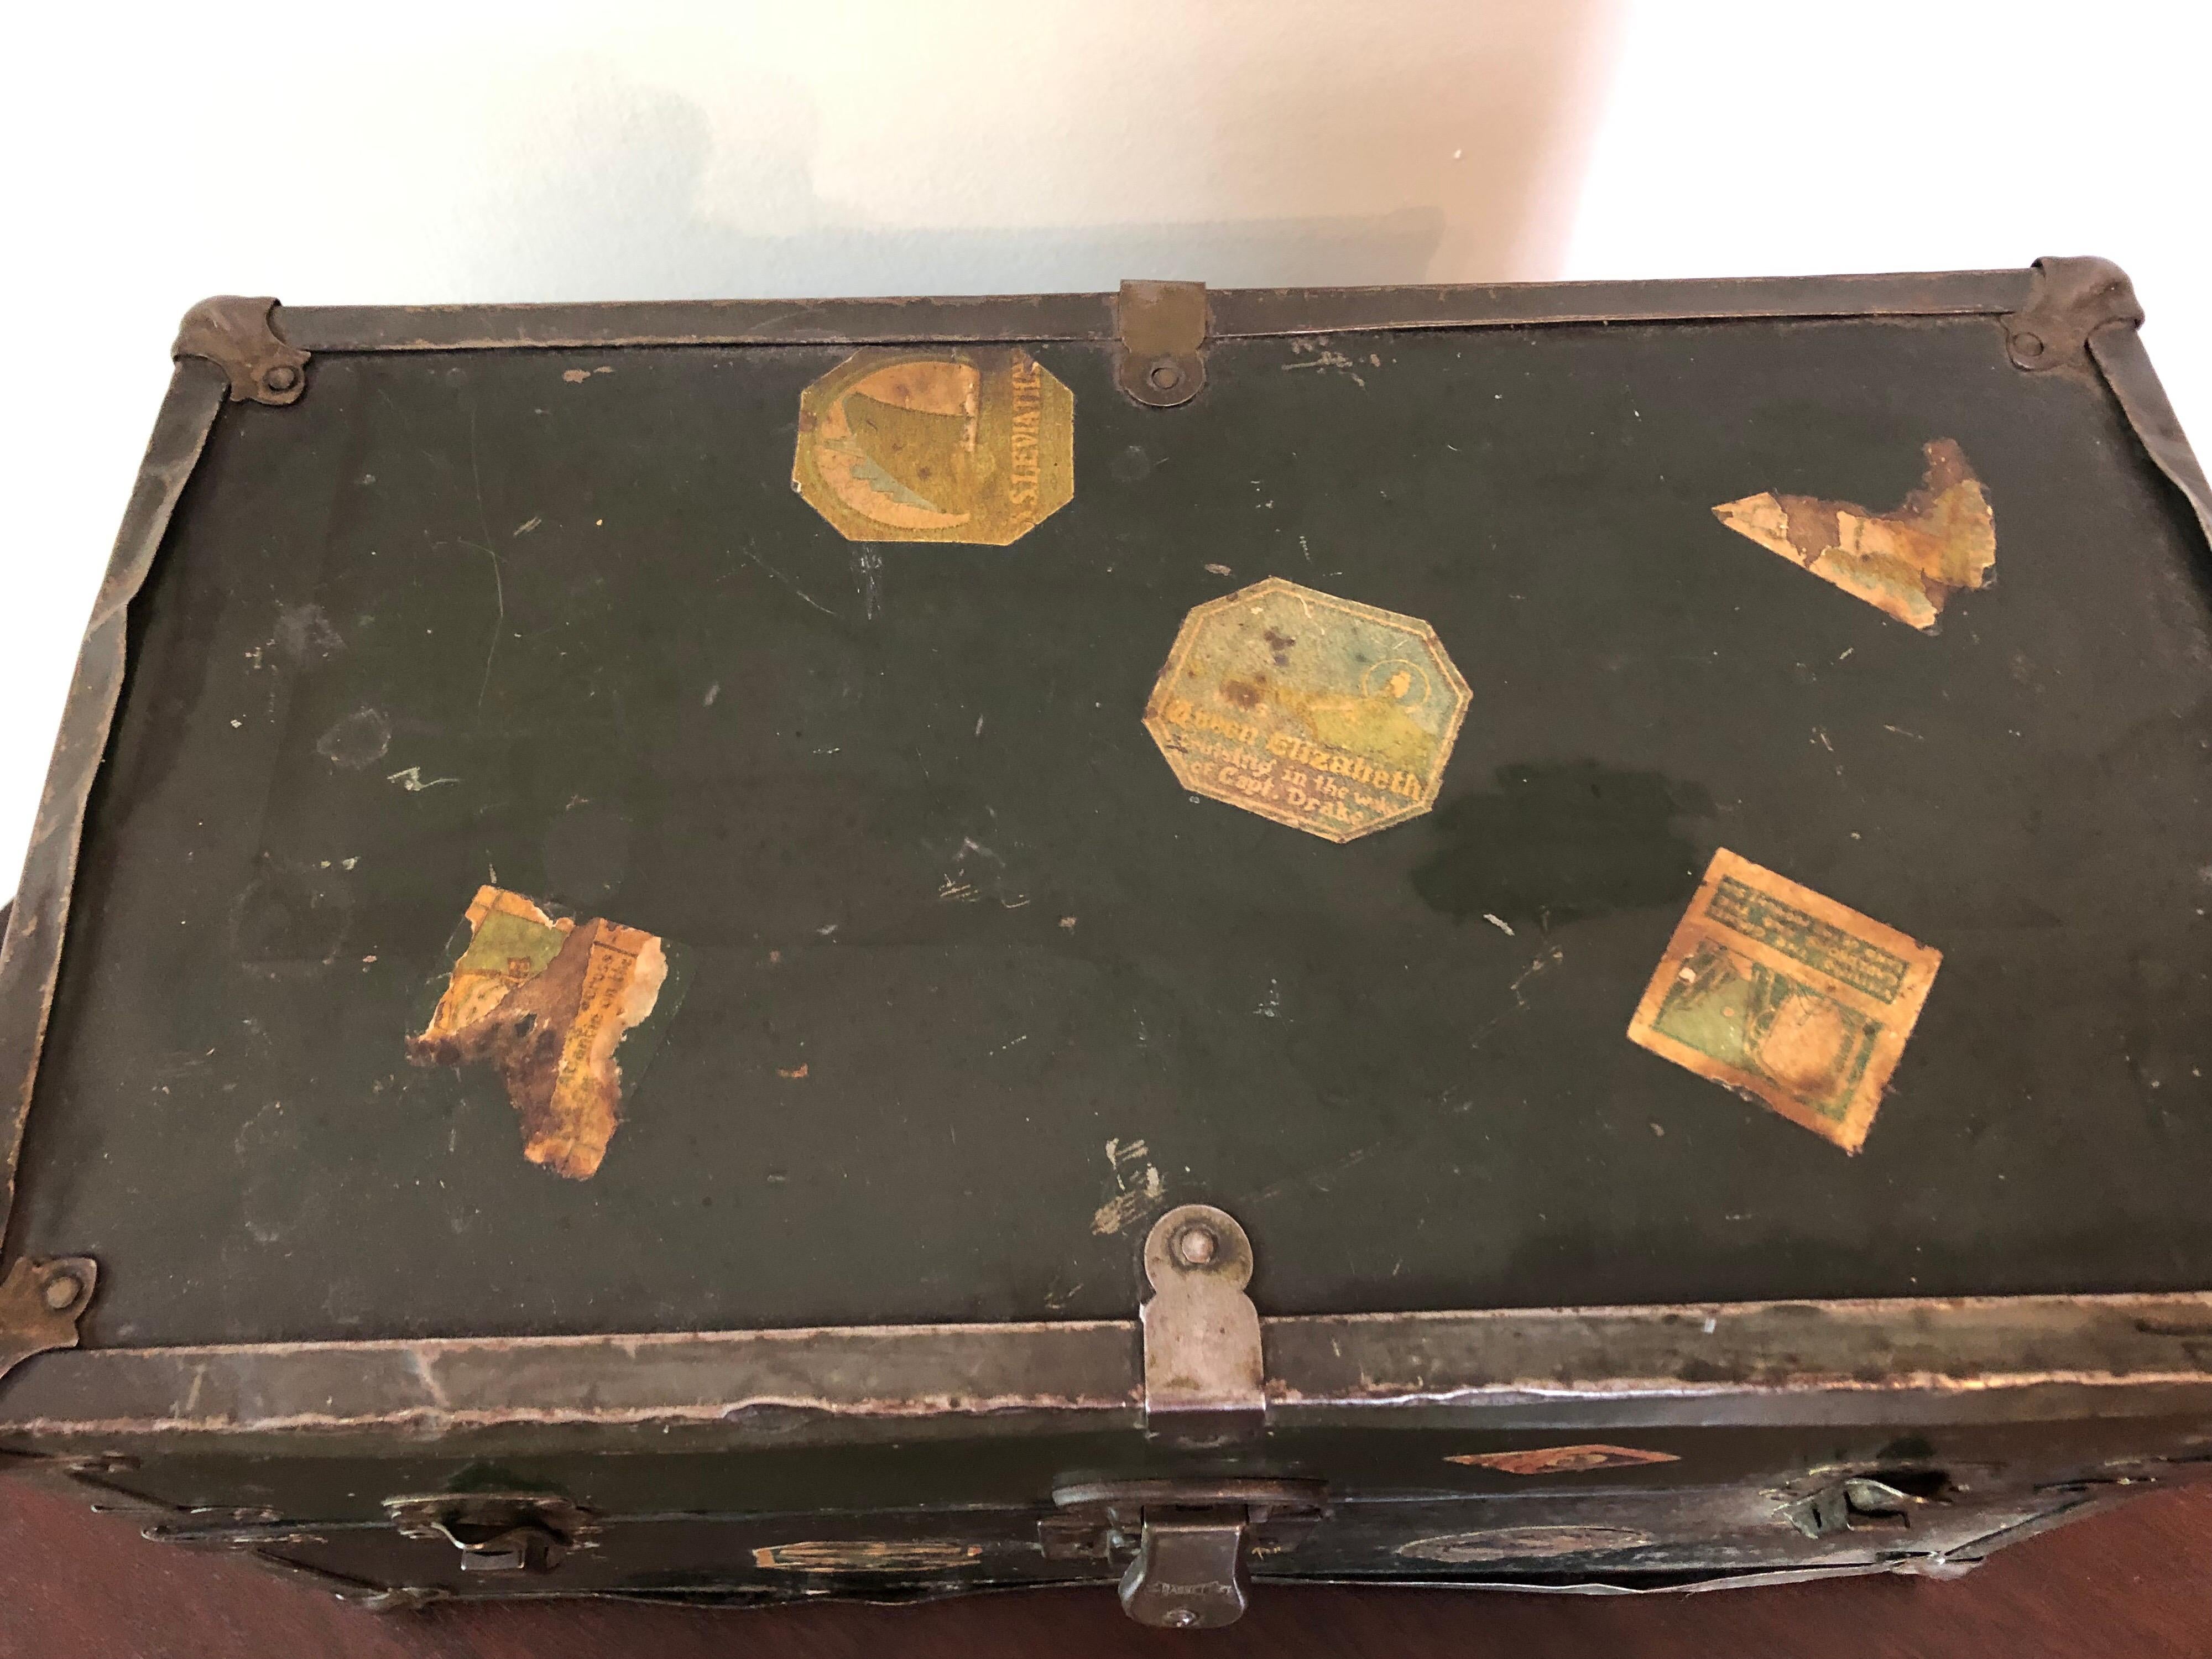 Vintage Metal Steamer Trunk with Luggage Label, Small In Fair Condition For Sale In Stockton, NJ